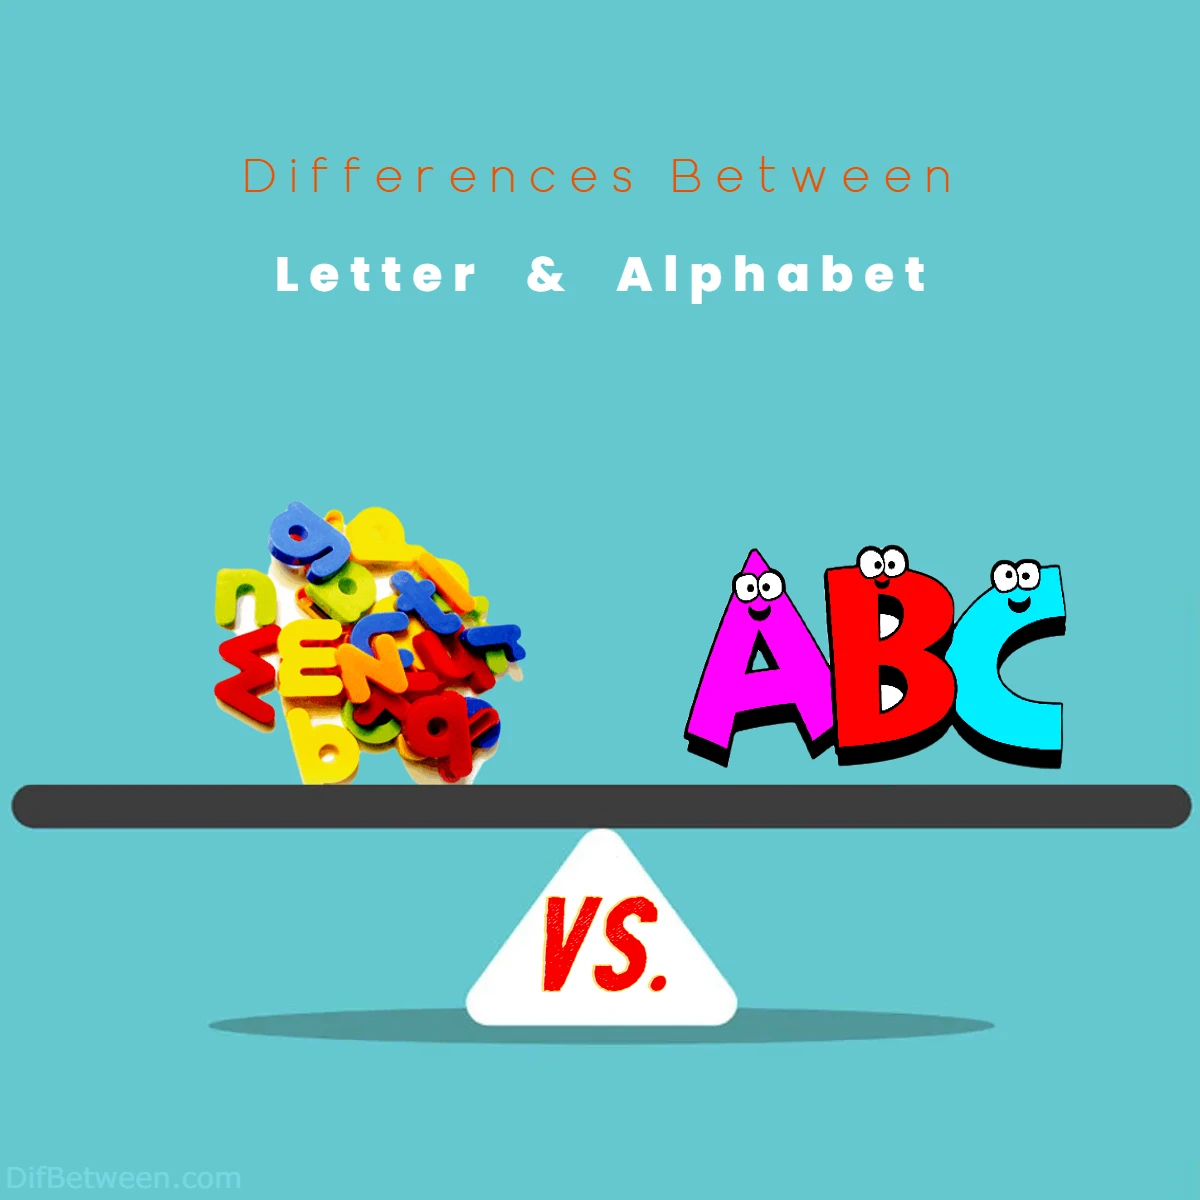 Differences Between Letter vs Alphabet